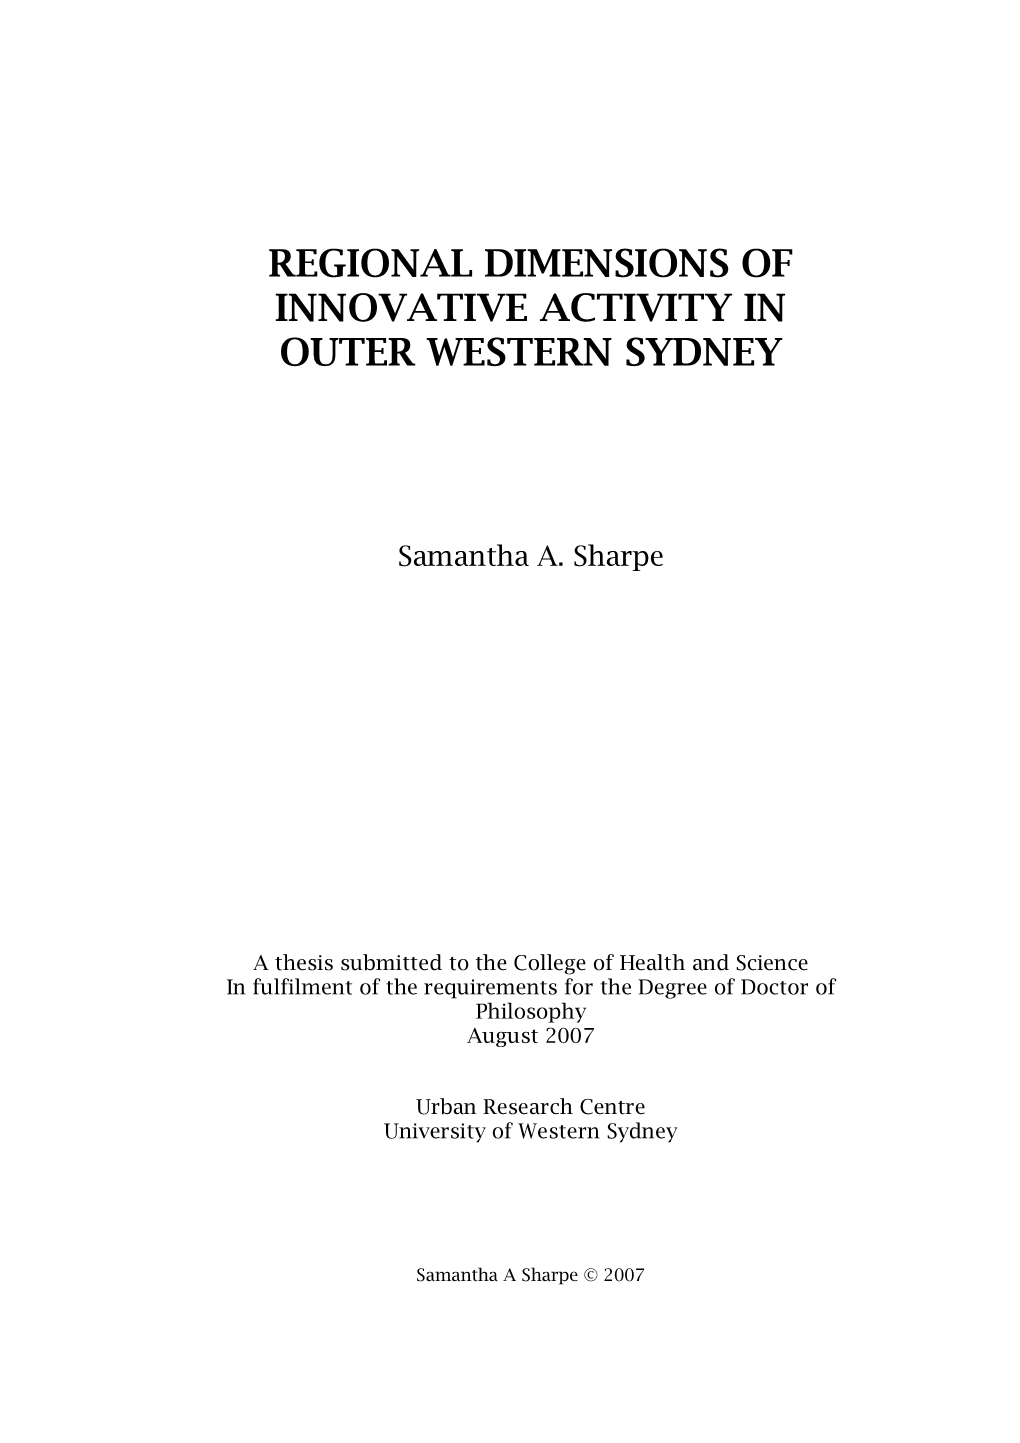 Regional Dimensions of Innovative Activity in Outer Western Sydney